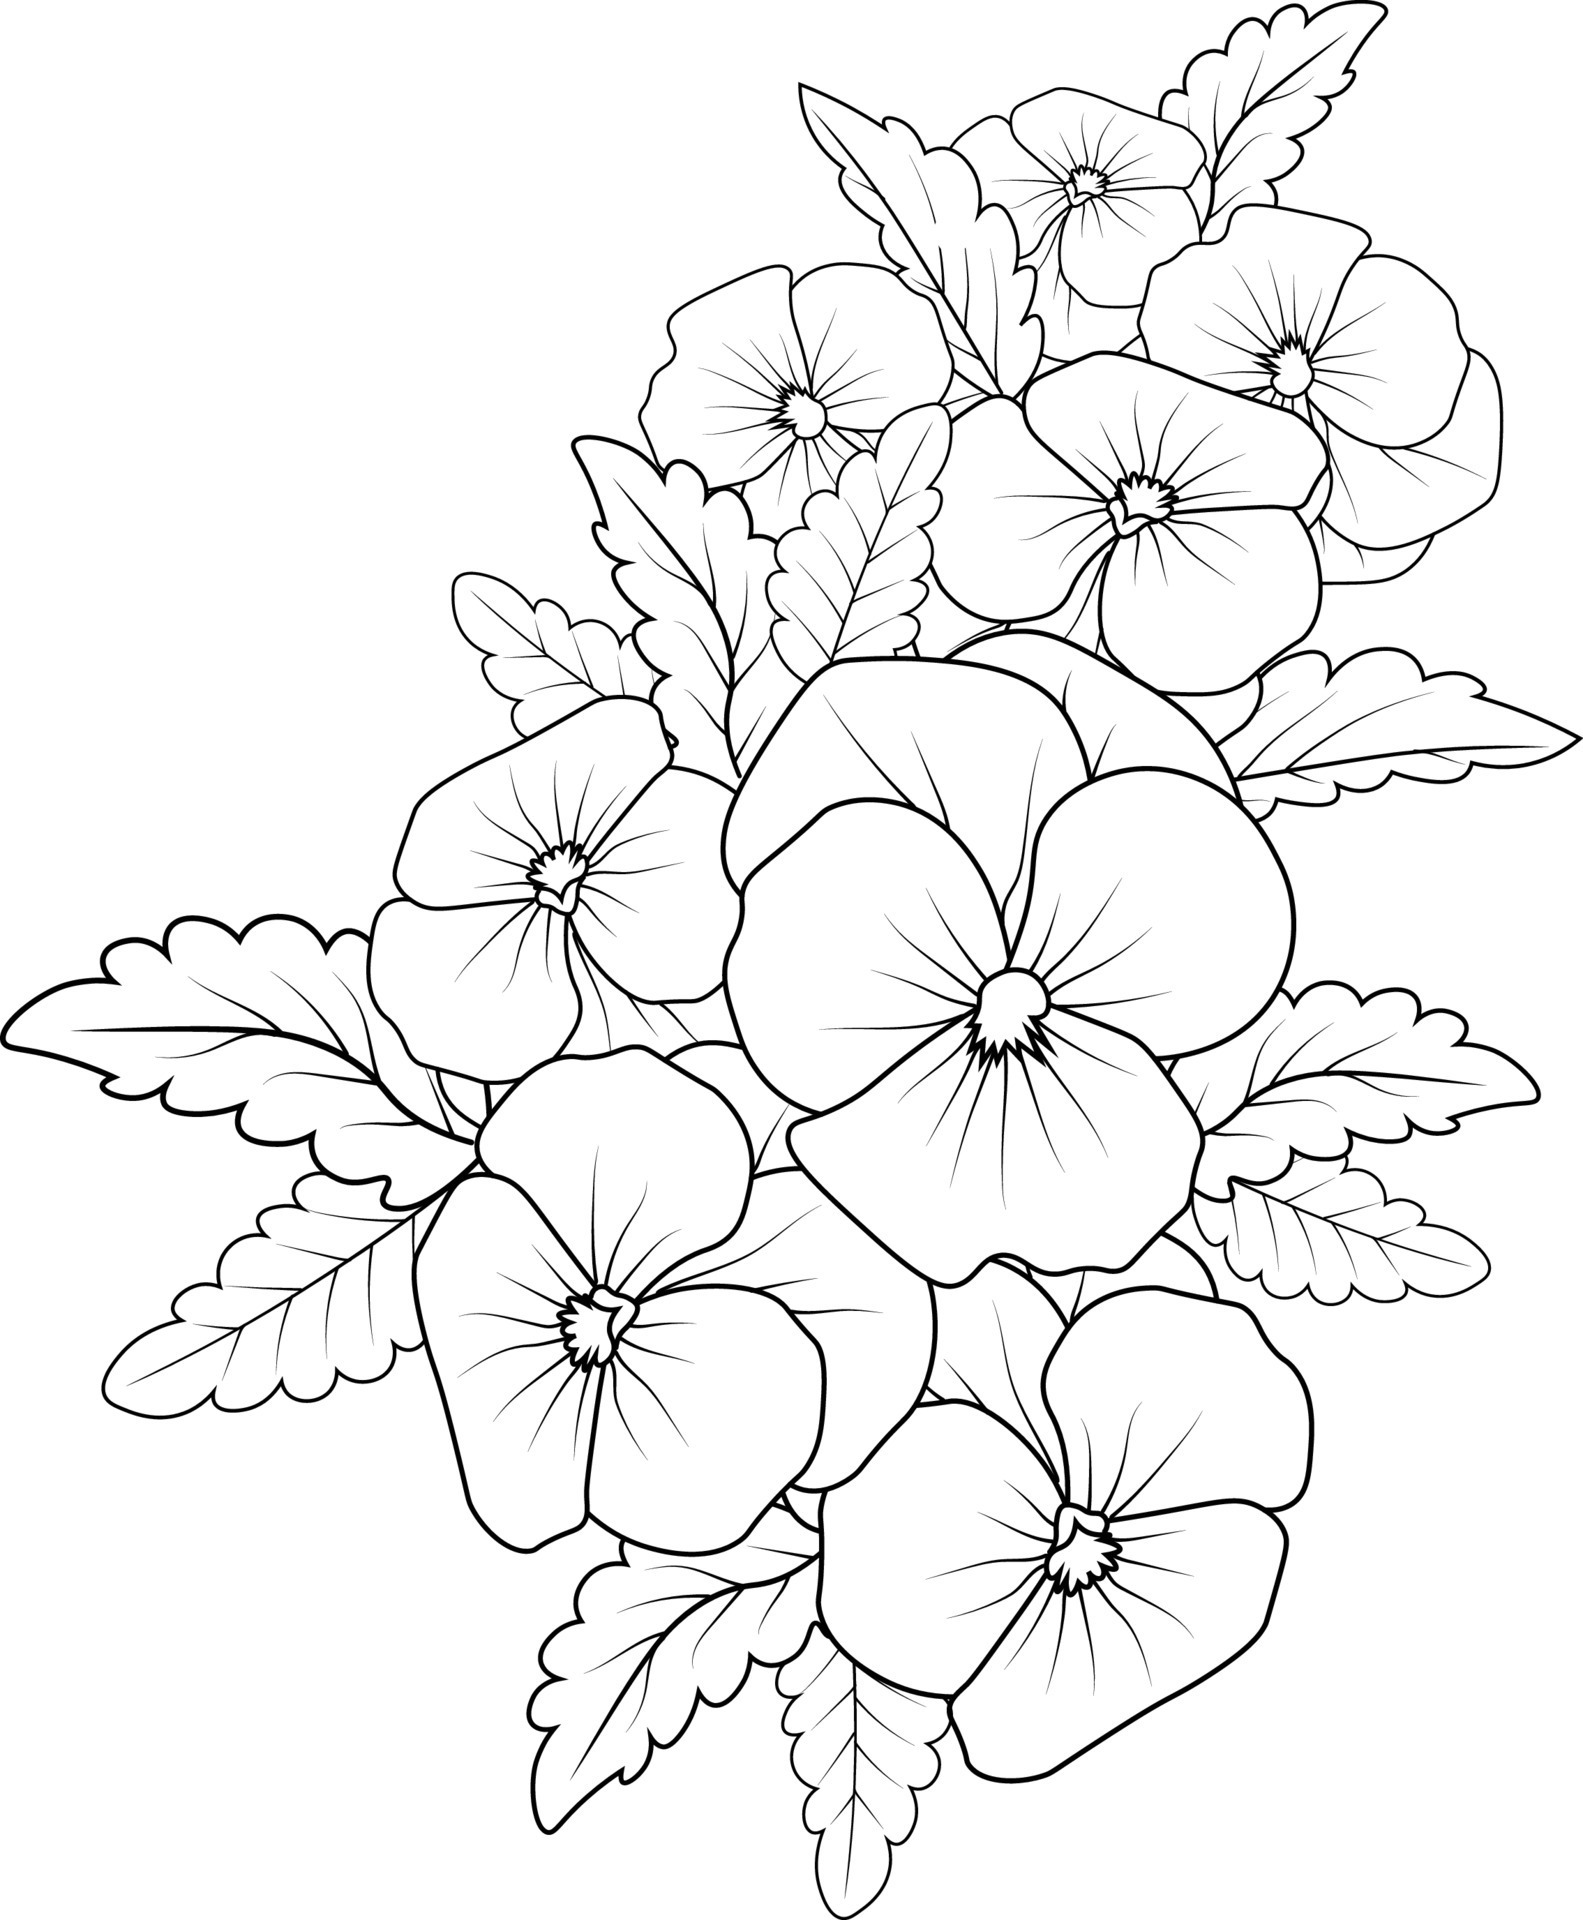 Blackandwhite bouquet of violets with leaves Vector Image